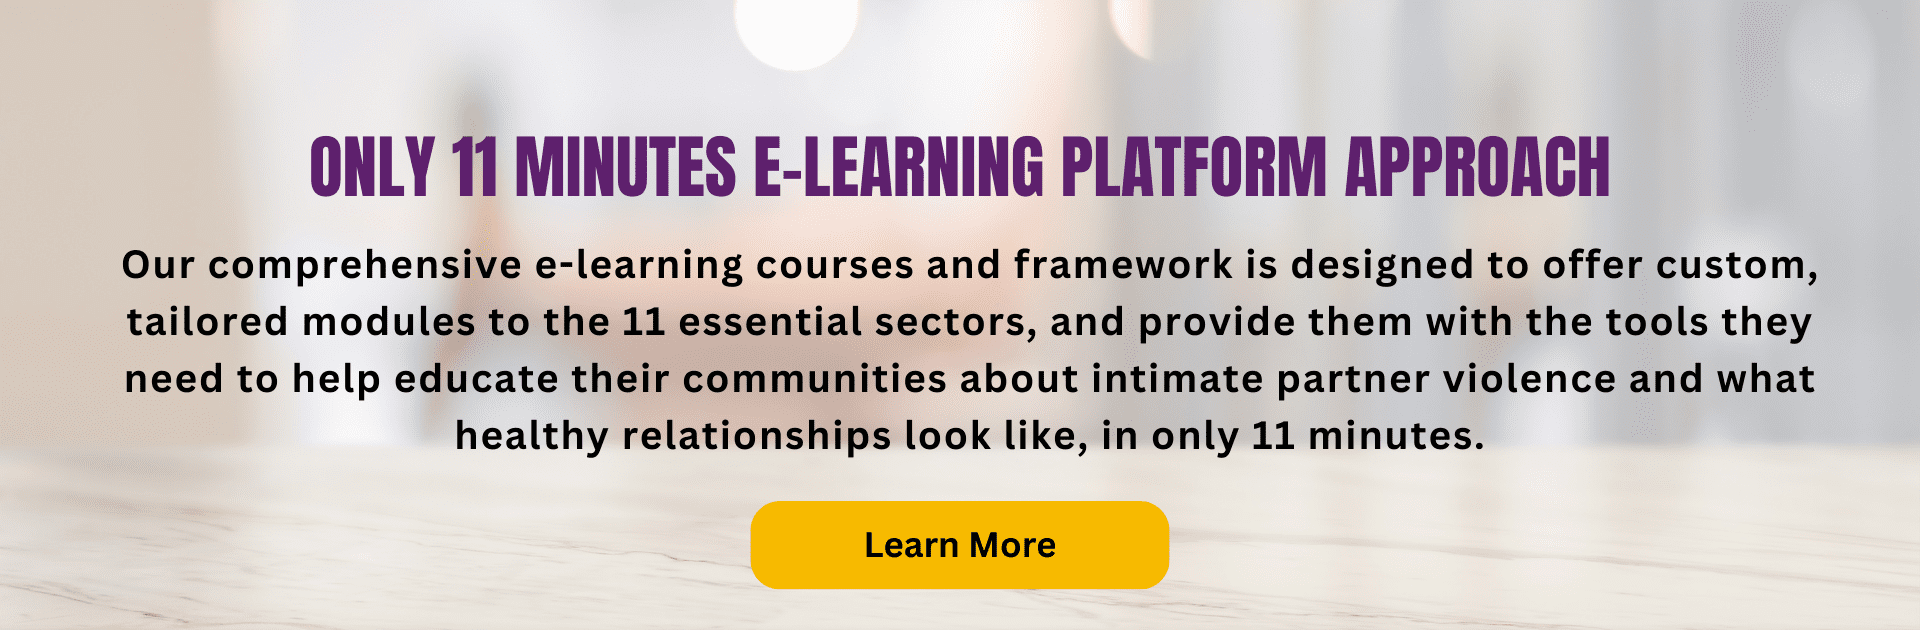 Only 11 Minutes E-Learning Platform Approach